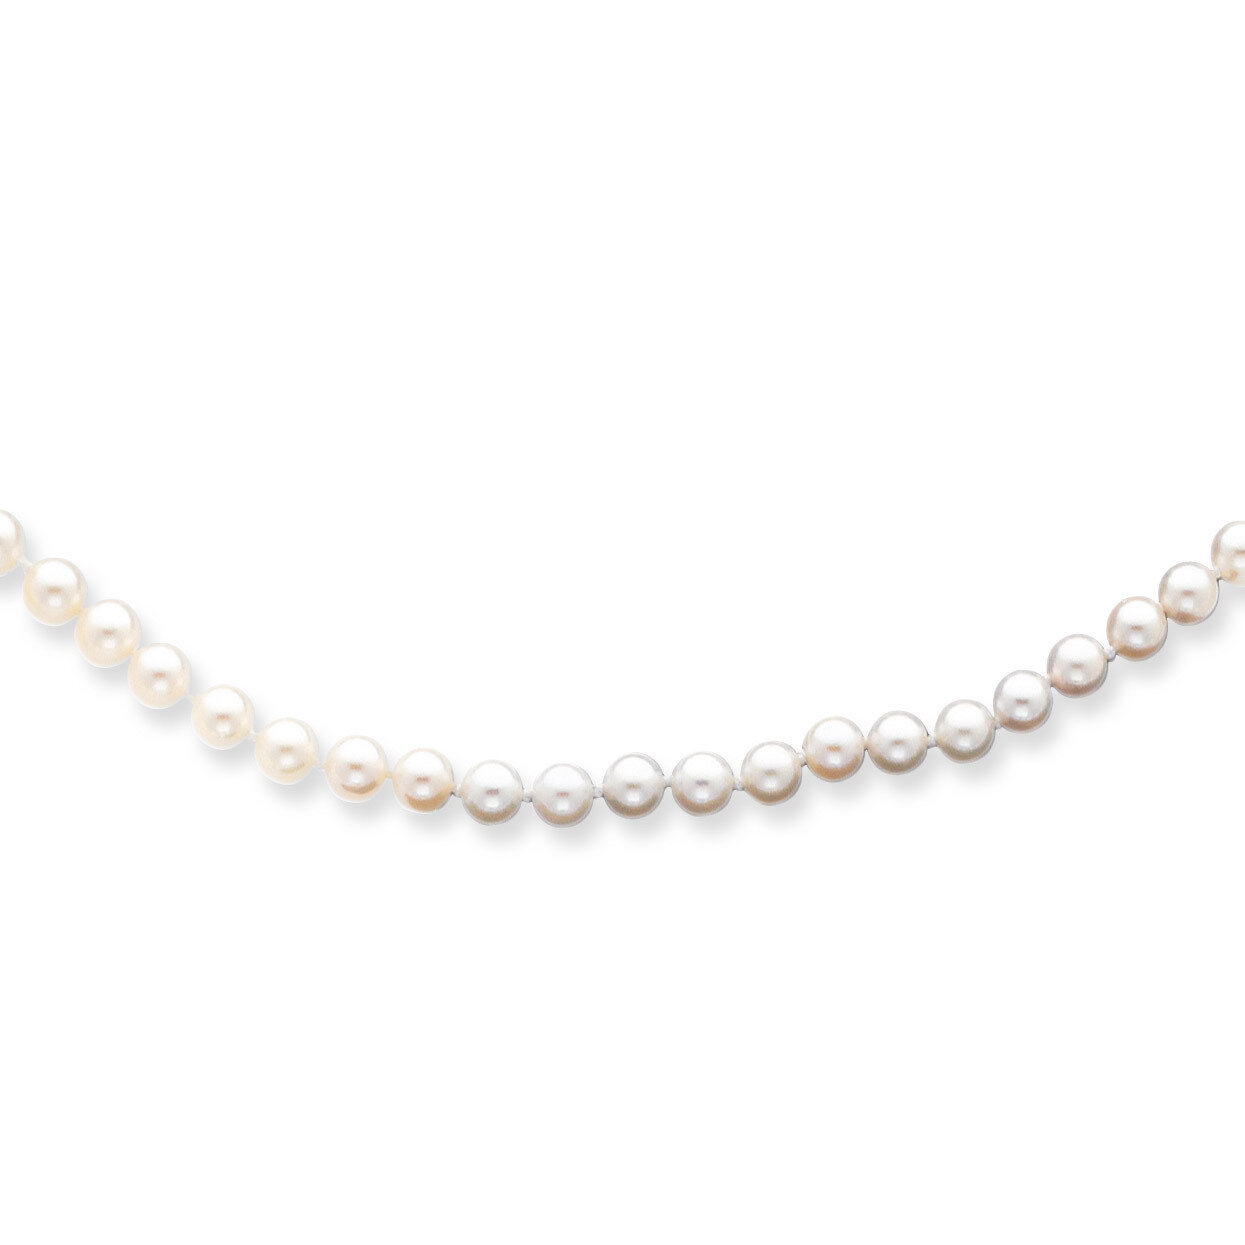 5-6mm Round White Saltwater Akoya Cultured Pearl Necklace 18 Inch 14k Gold PL50AA-18